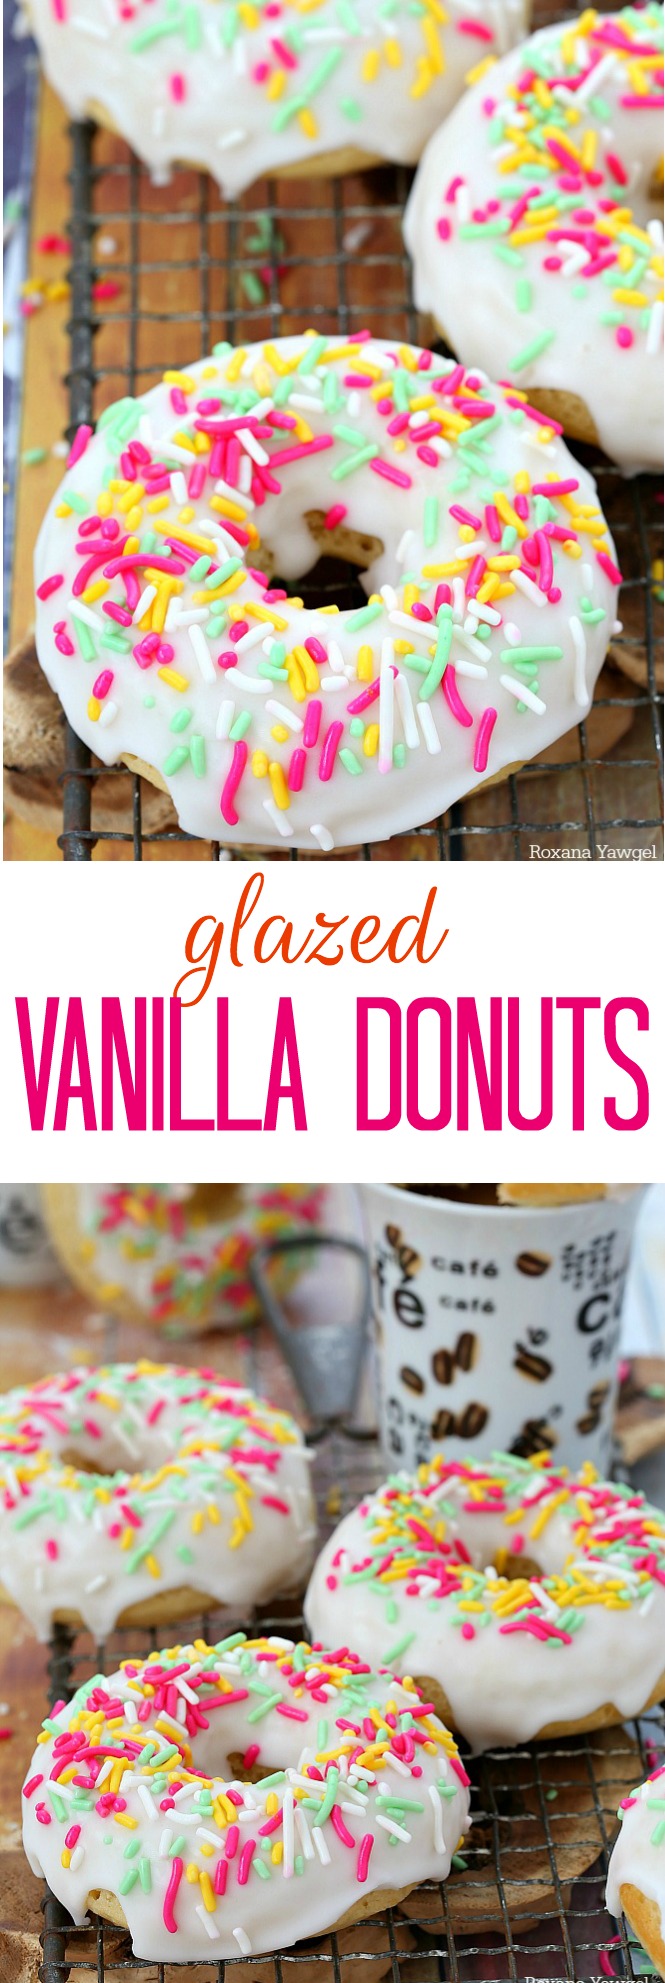 Soft and delicious baked donuts dipped in a thick vanilla glaze and topped with sprinkles, these glazed vanilla donuts are sure to brighten up your day!